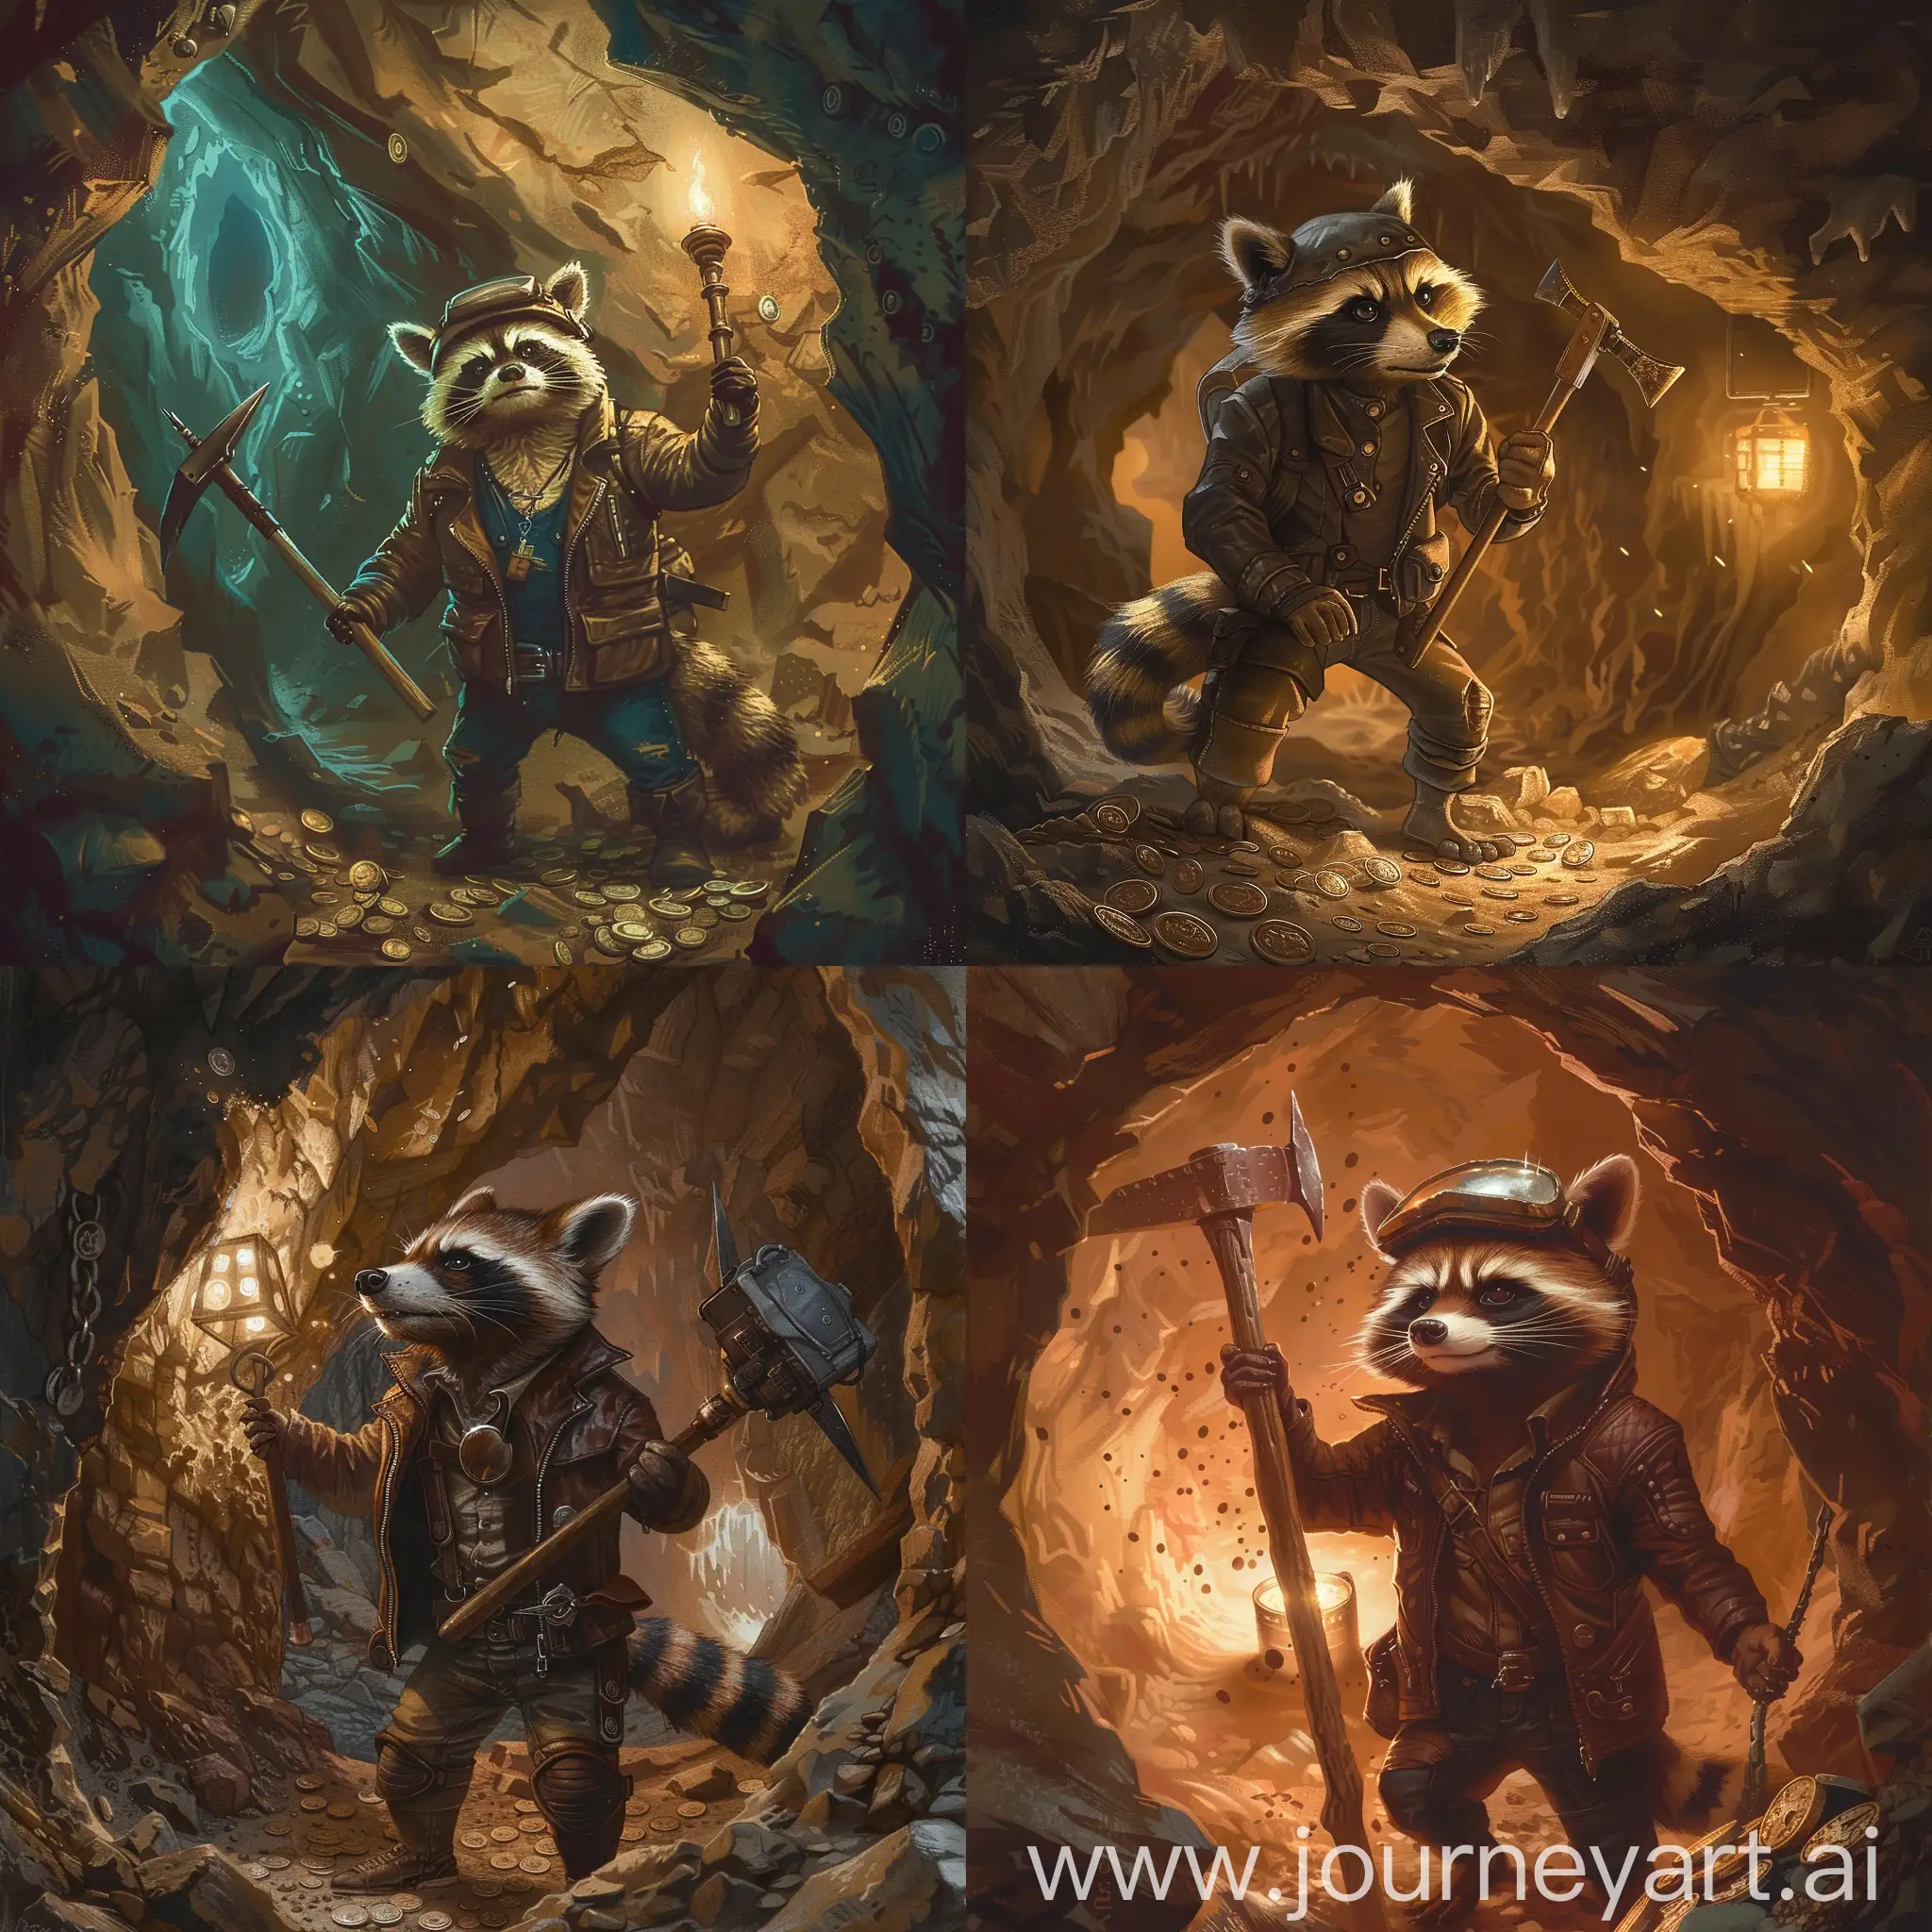 Raccoon miner standing in a cave, in a leather jacket and a helmet, in the hands of a pickaxe, in the walls of the cave there are coins speckled, dim light from a lamp